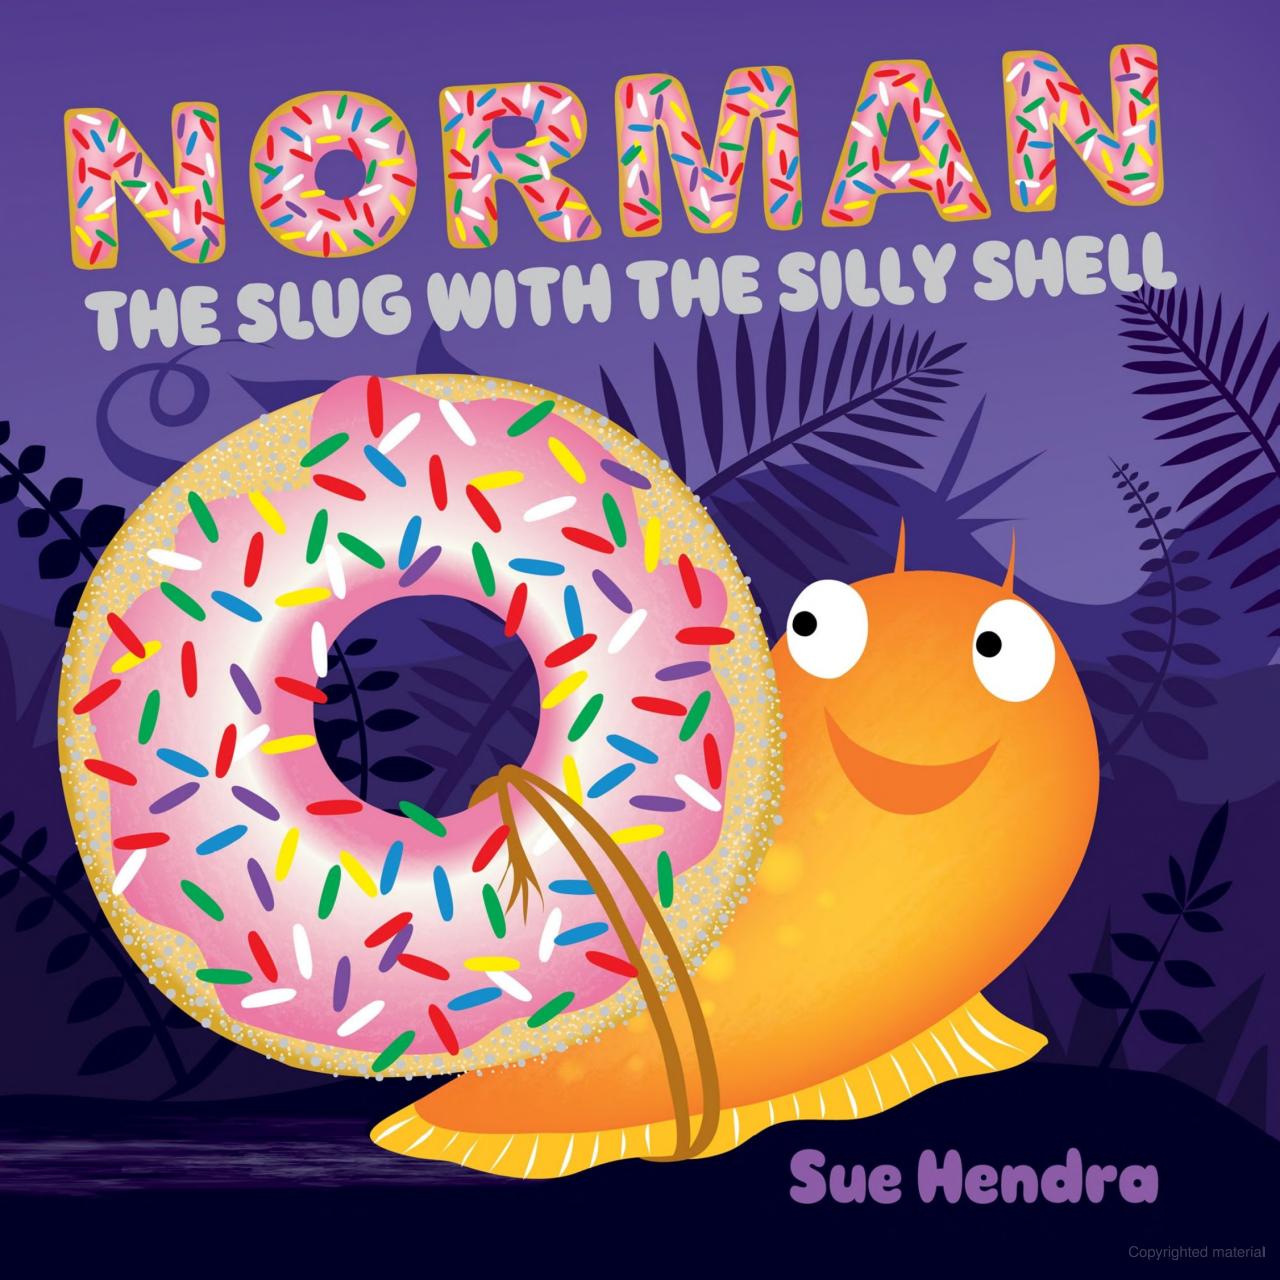 September's book: "Norman the Slug with the Silly Shell"